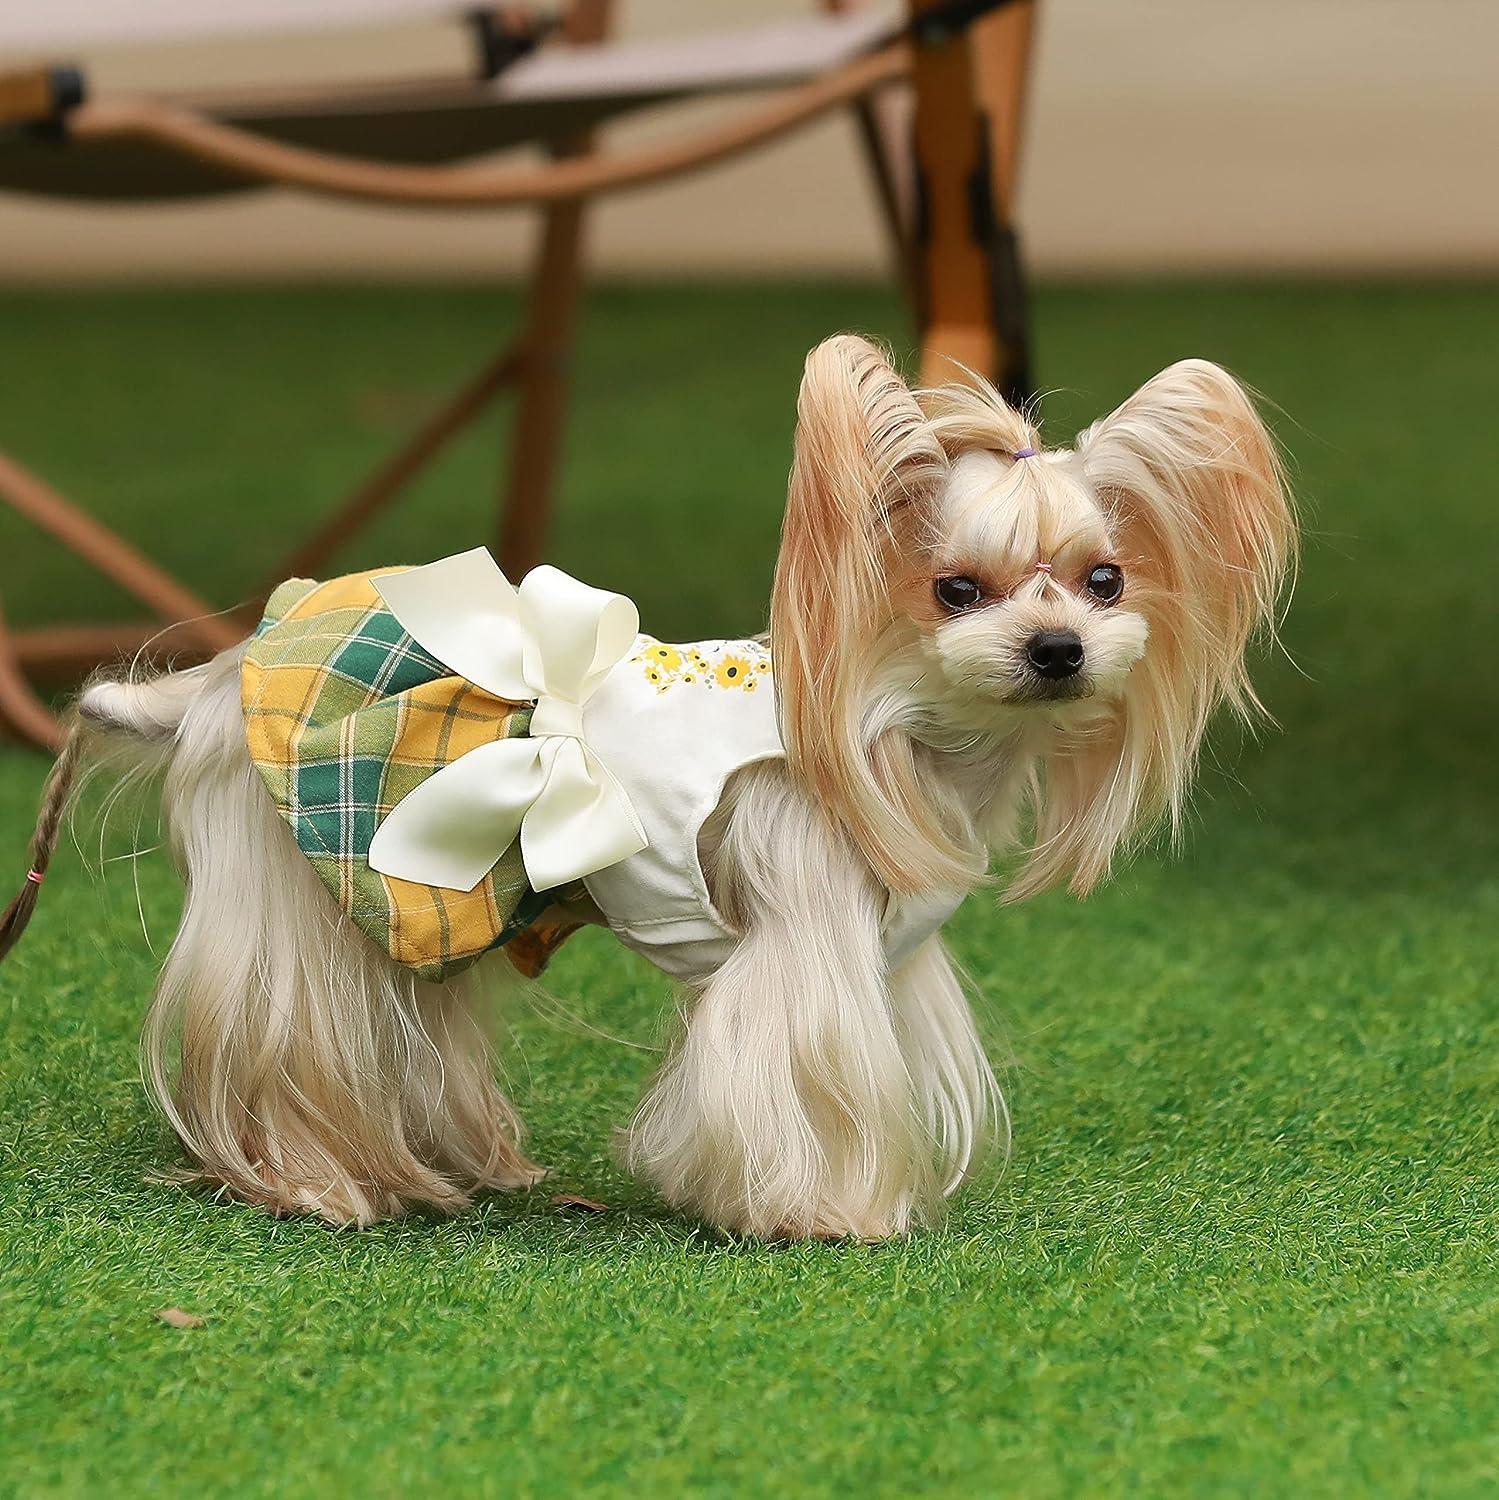 Designer Dog Clothes for Small Dogs Clothes Luxury Girl Summer Dog Dresses  for Pomeranian Chihuahua Puppy Pet Clothing Dress